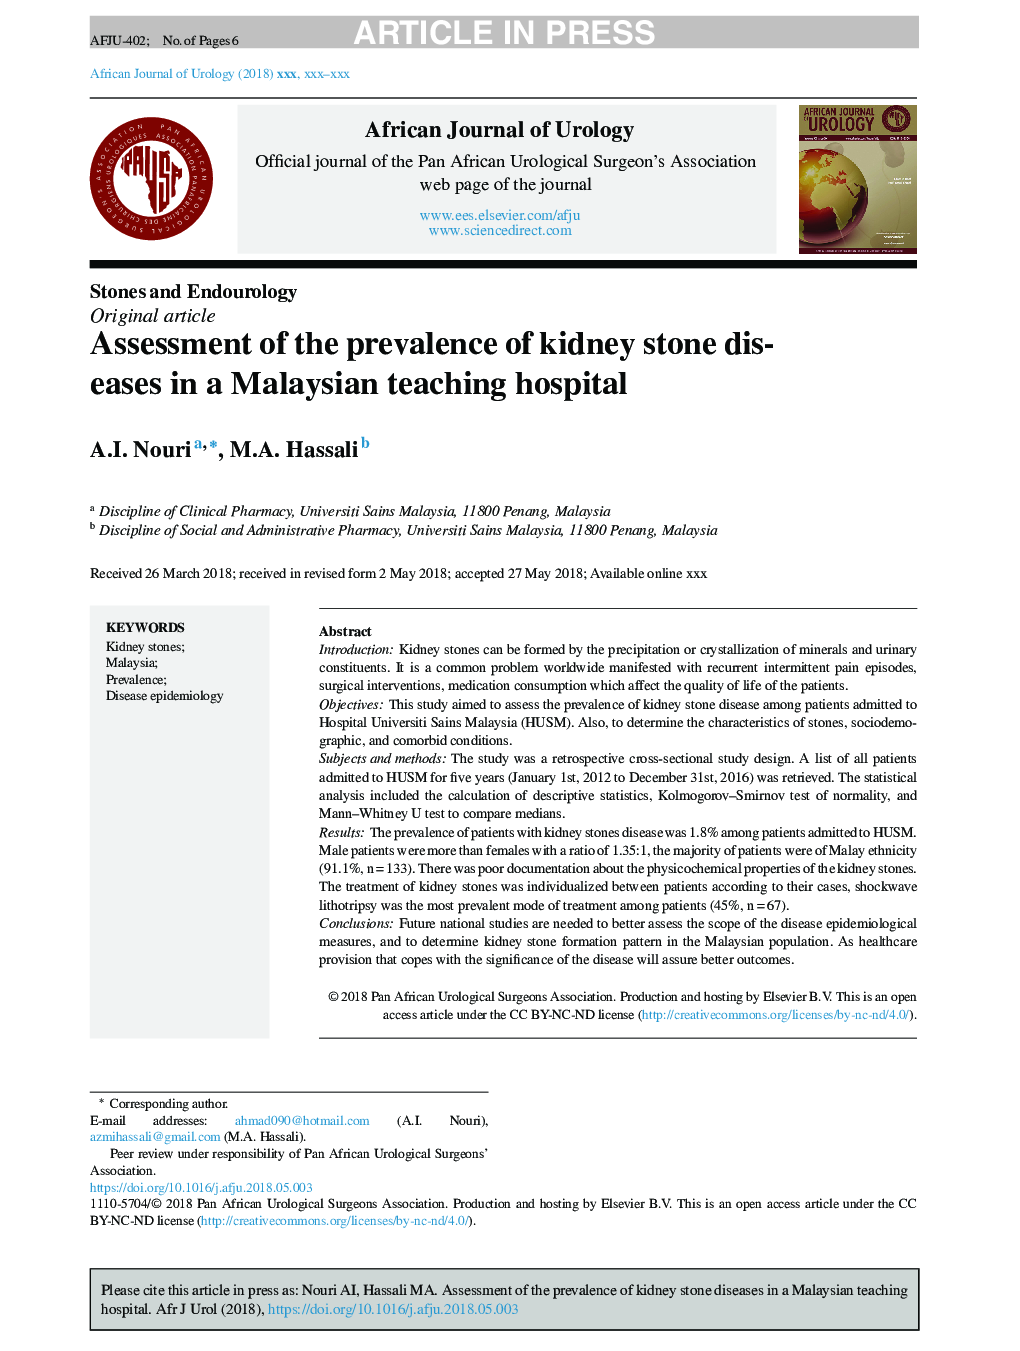 Assessment of kidney stone disease prevalence in a teaching hospital